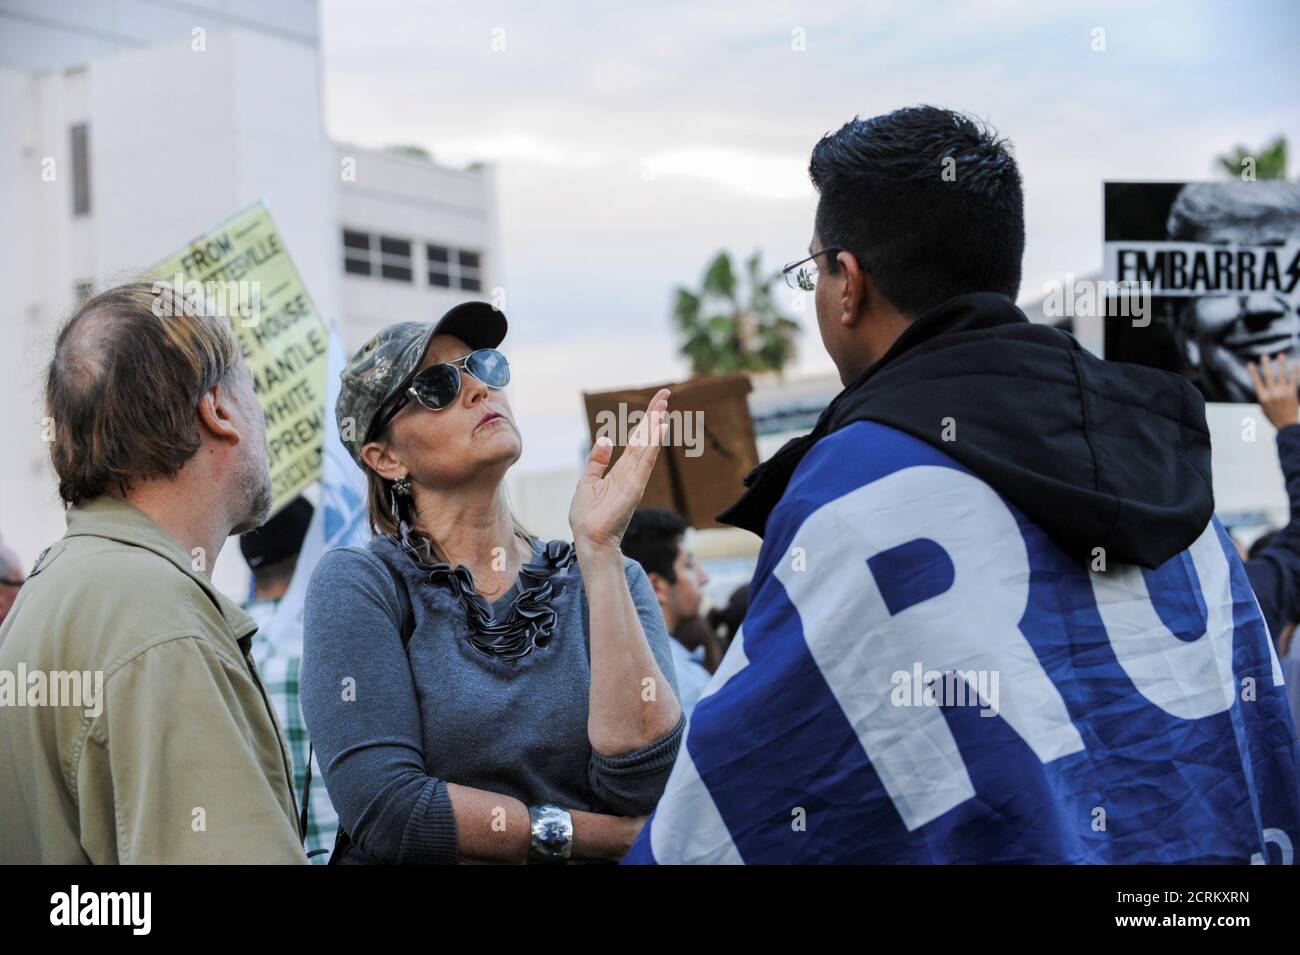 Melanie Chapman (C) talks with Danny Rodriguez (R), a Trump supporter, at an anti-Trump protest in a park a few miles from a gated community where U.S. President Donald Trump is holding a fundraiser in Beverly Hills, California, U.S. March 13, 2018. REUTERS/Andrew Cullen Stock Photo